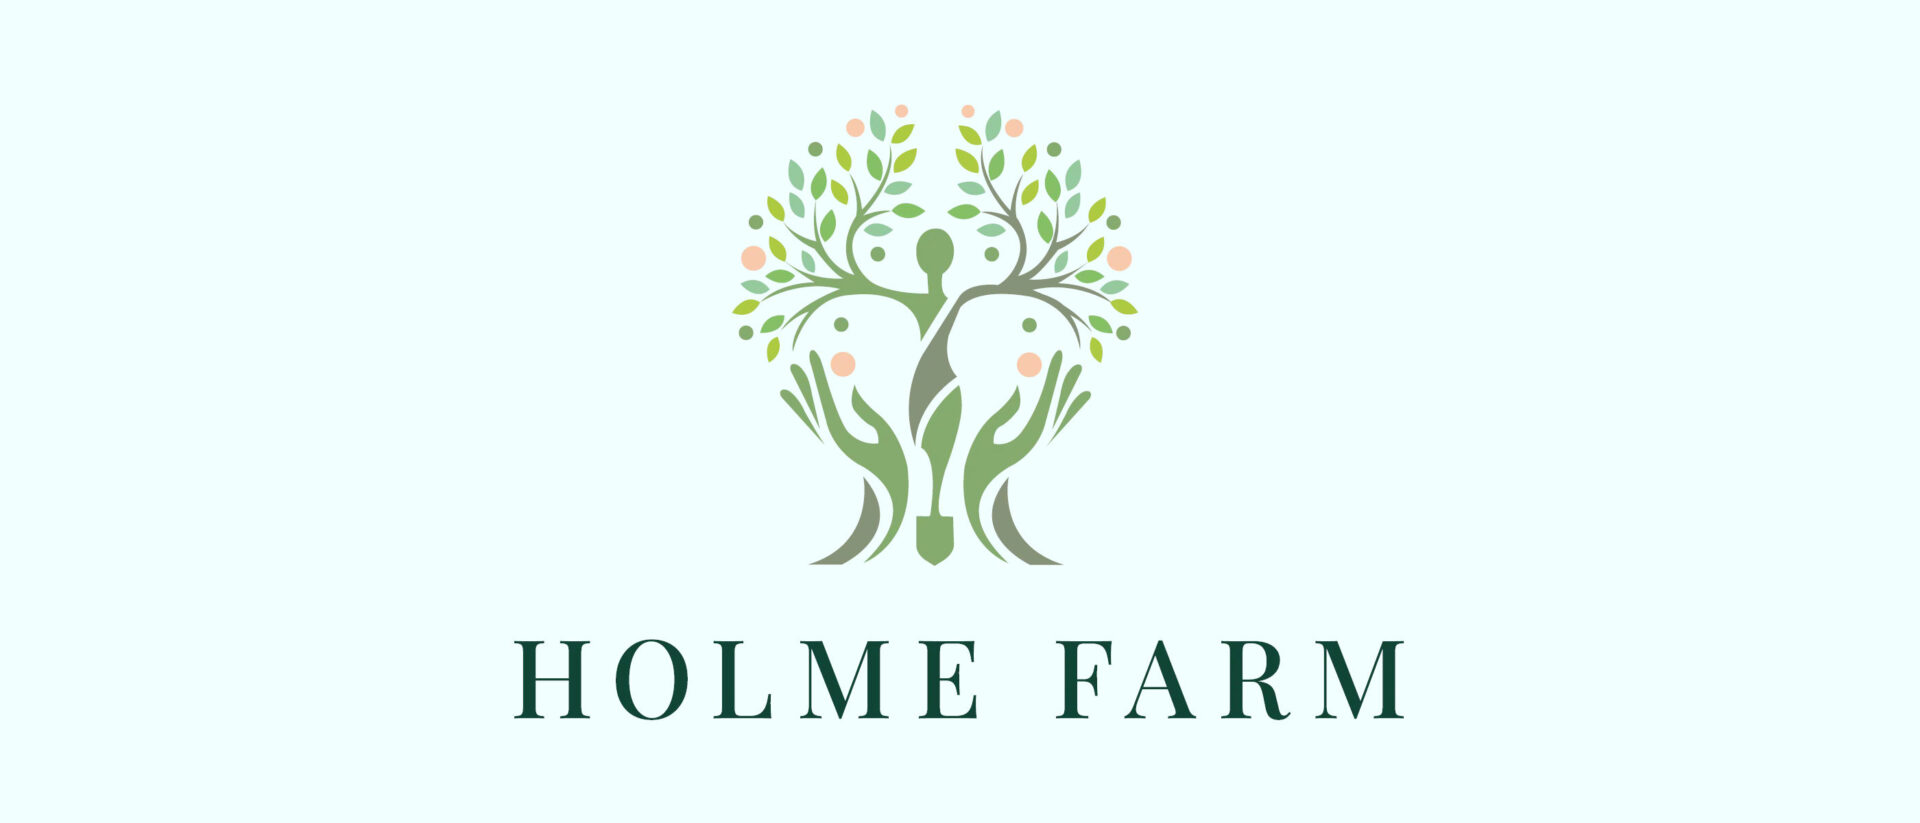 Runn Radio is proud to support Holme Farm